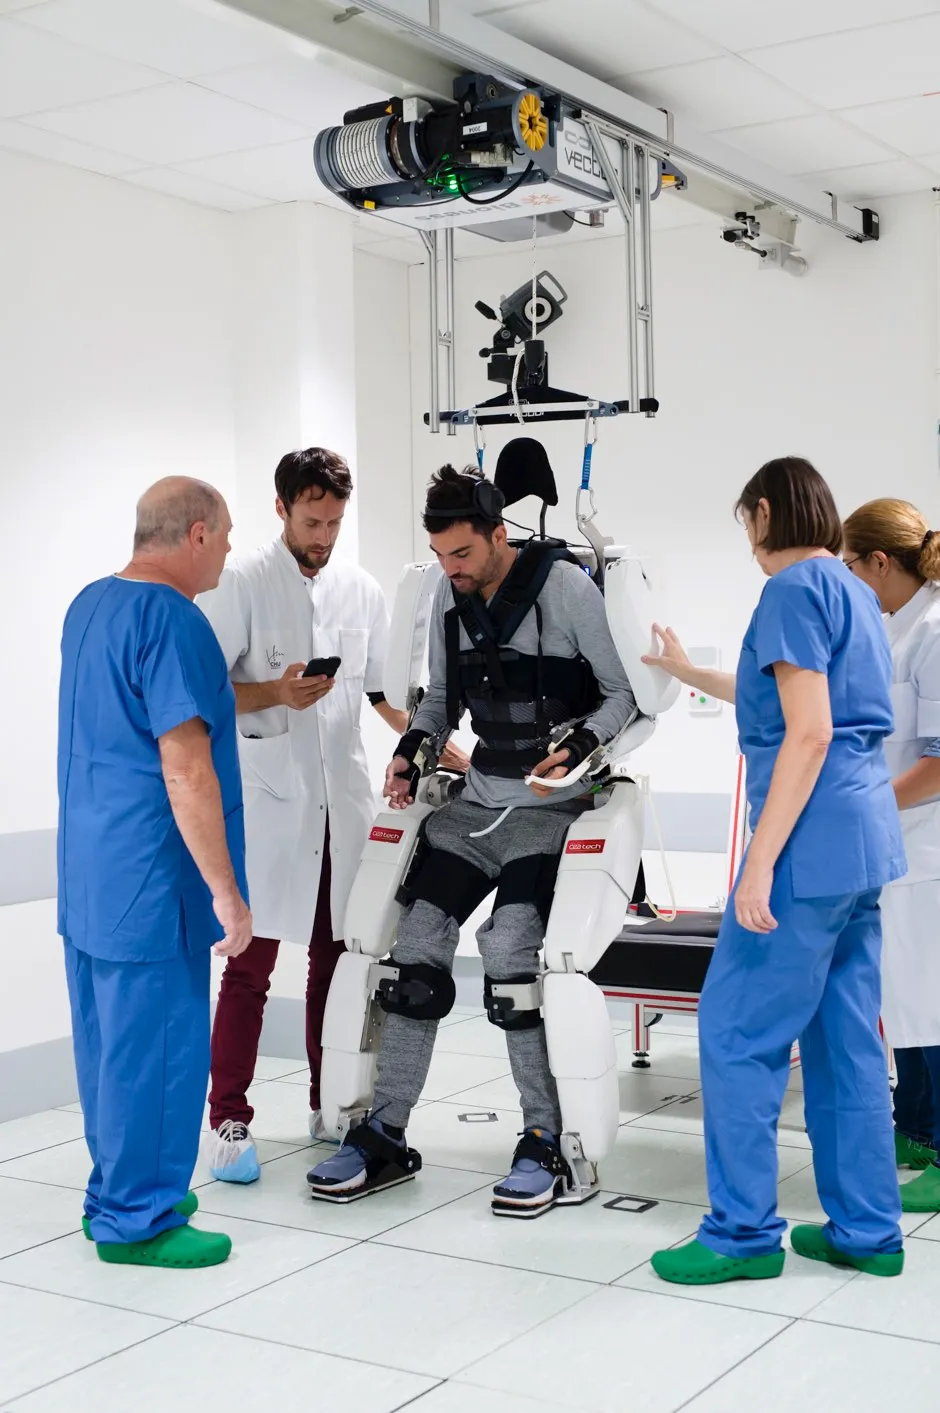 Thibault is able to walk while wearing an exoskeleton controlled by his brain signals © Clinatec/Juliette Treillet/PA